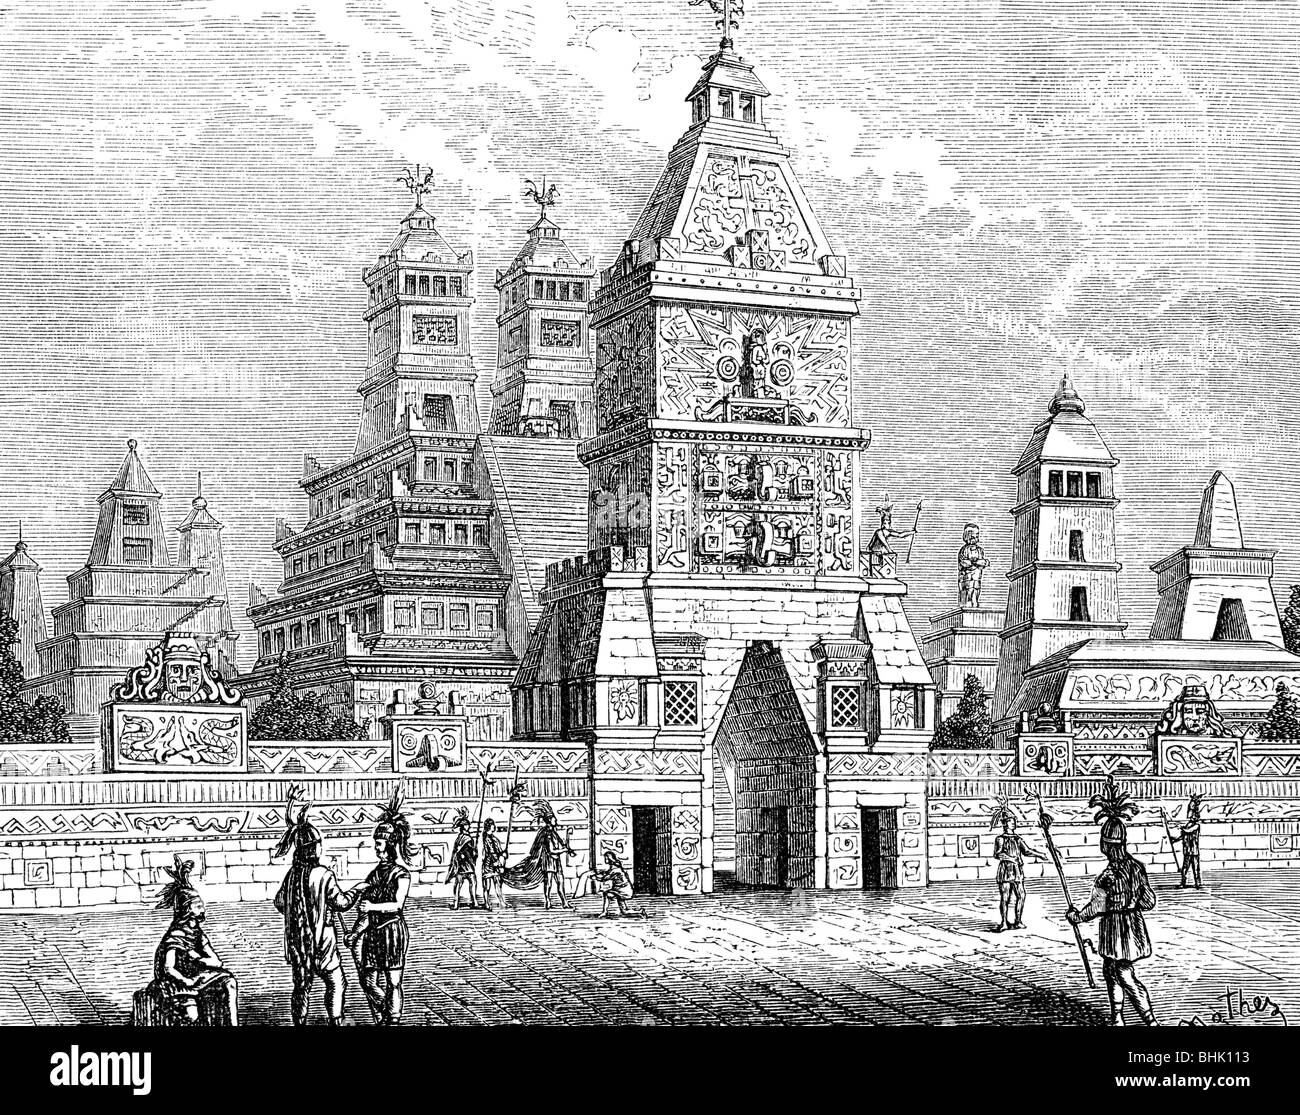 geography / travel, Mexico, Mexico City (Tenochtitlan), city view / cityscape, city wall of Aztec main teocalli, reconstruction by D. Mothes, wood engraving, 19th century, historic, historical, Central America, Mesoamerican site, city view, cityscape, city views, cityscapes, townscape, townscapes, city gate, city gates, architecture, pre-Colombian, Aztec Empire, Aztecs, temple, temples, sites, CEAM, people, Stock Photo